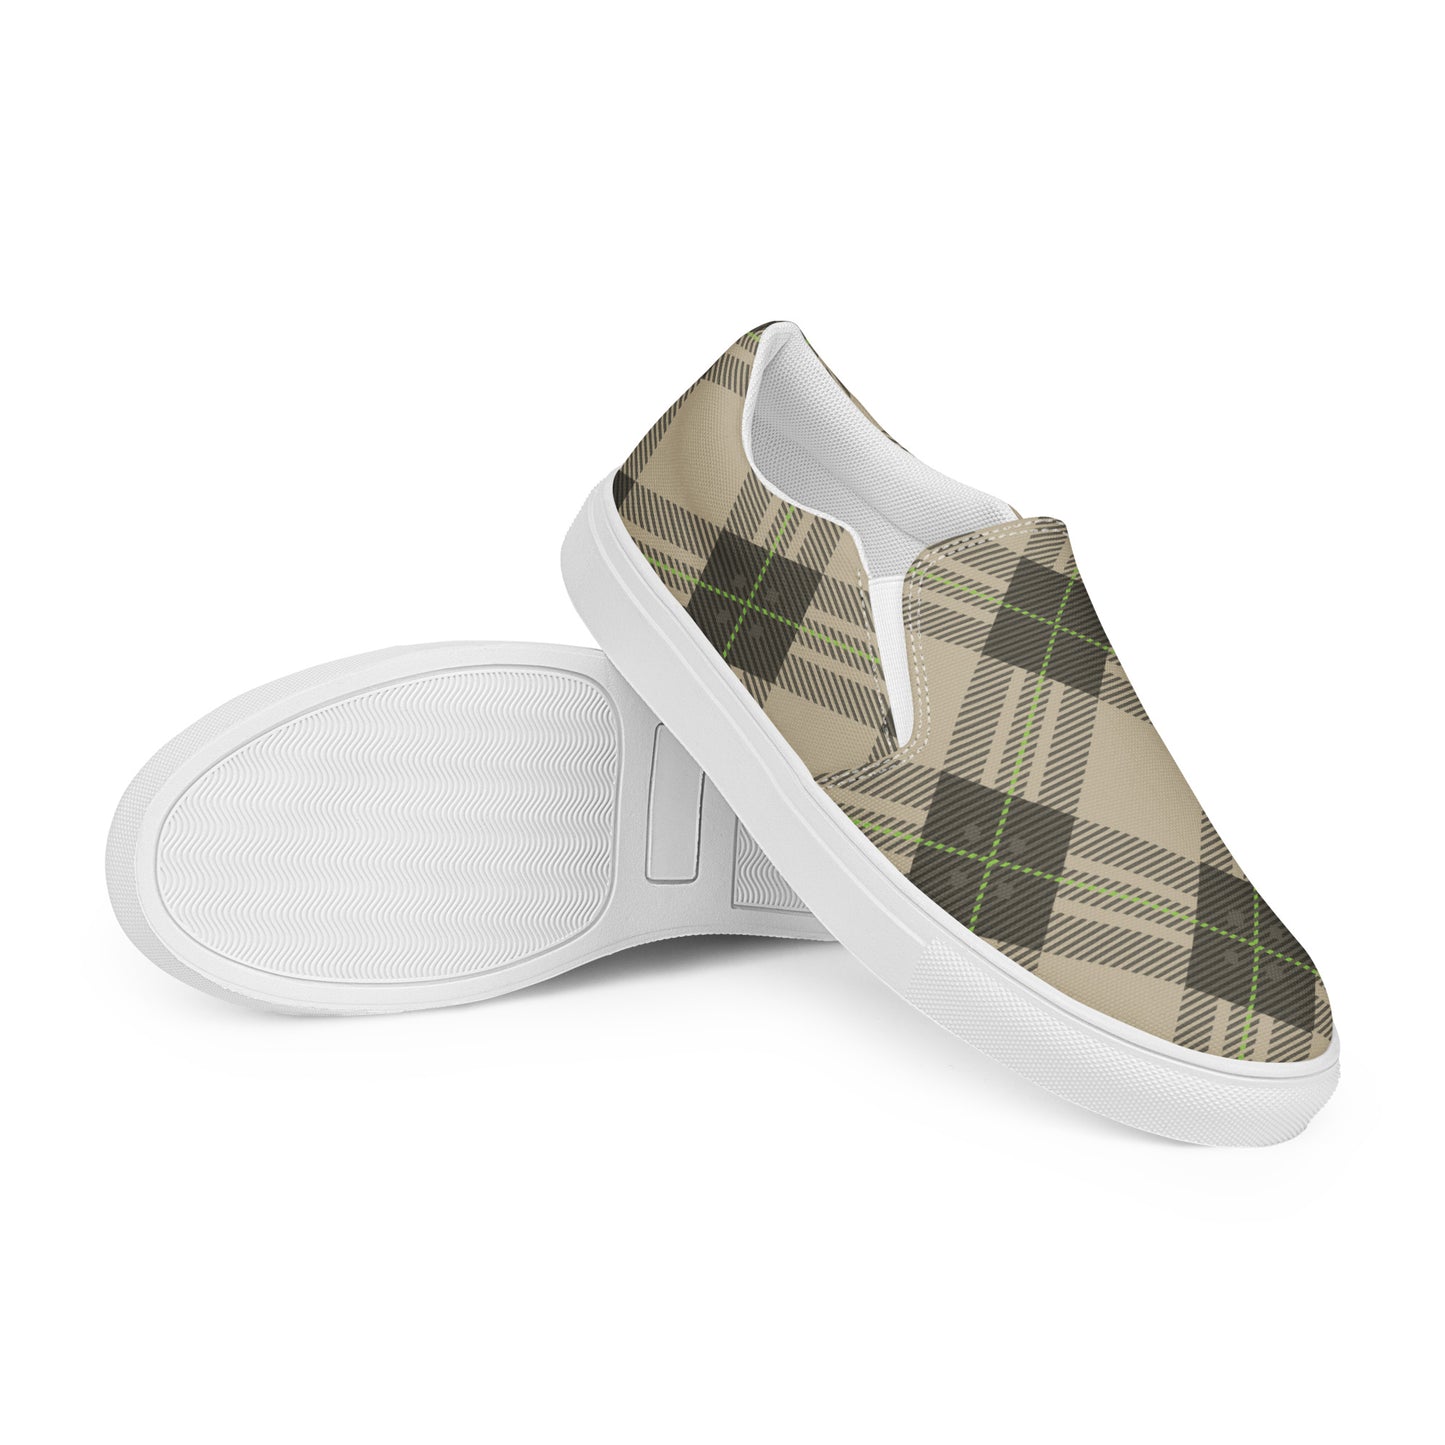 Deep Brown Tartan - Sustainably Made Men's Slip-On Canvas Shoes